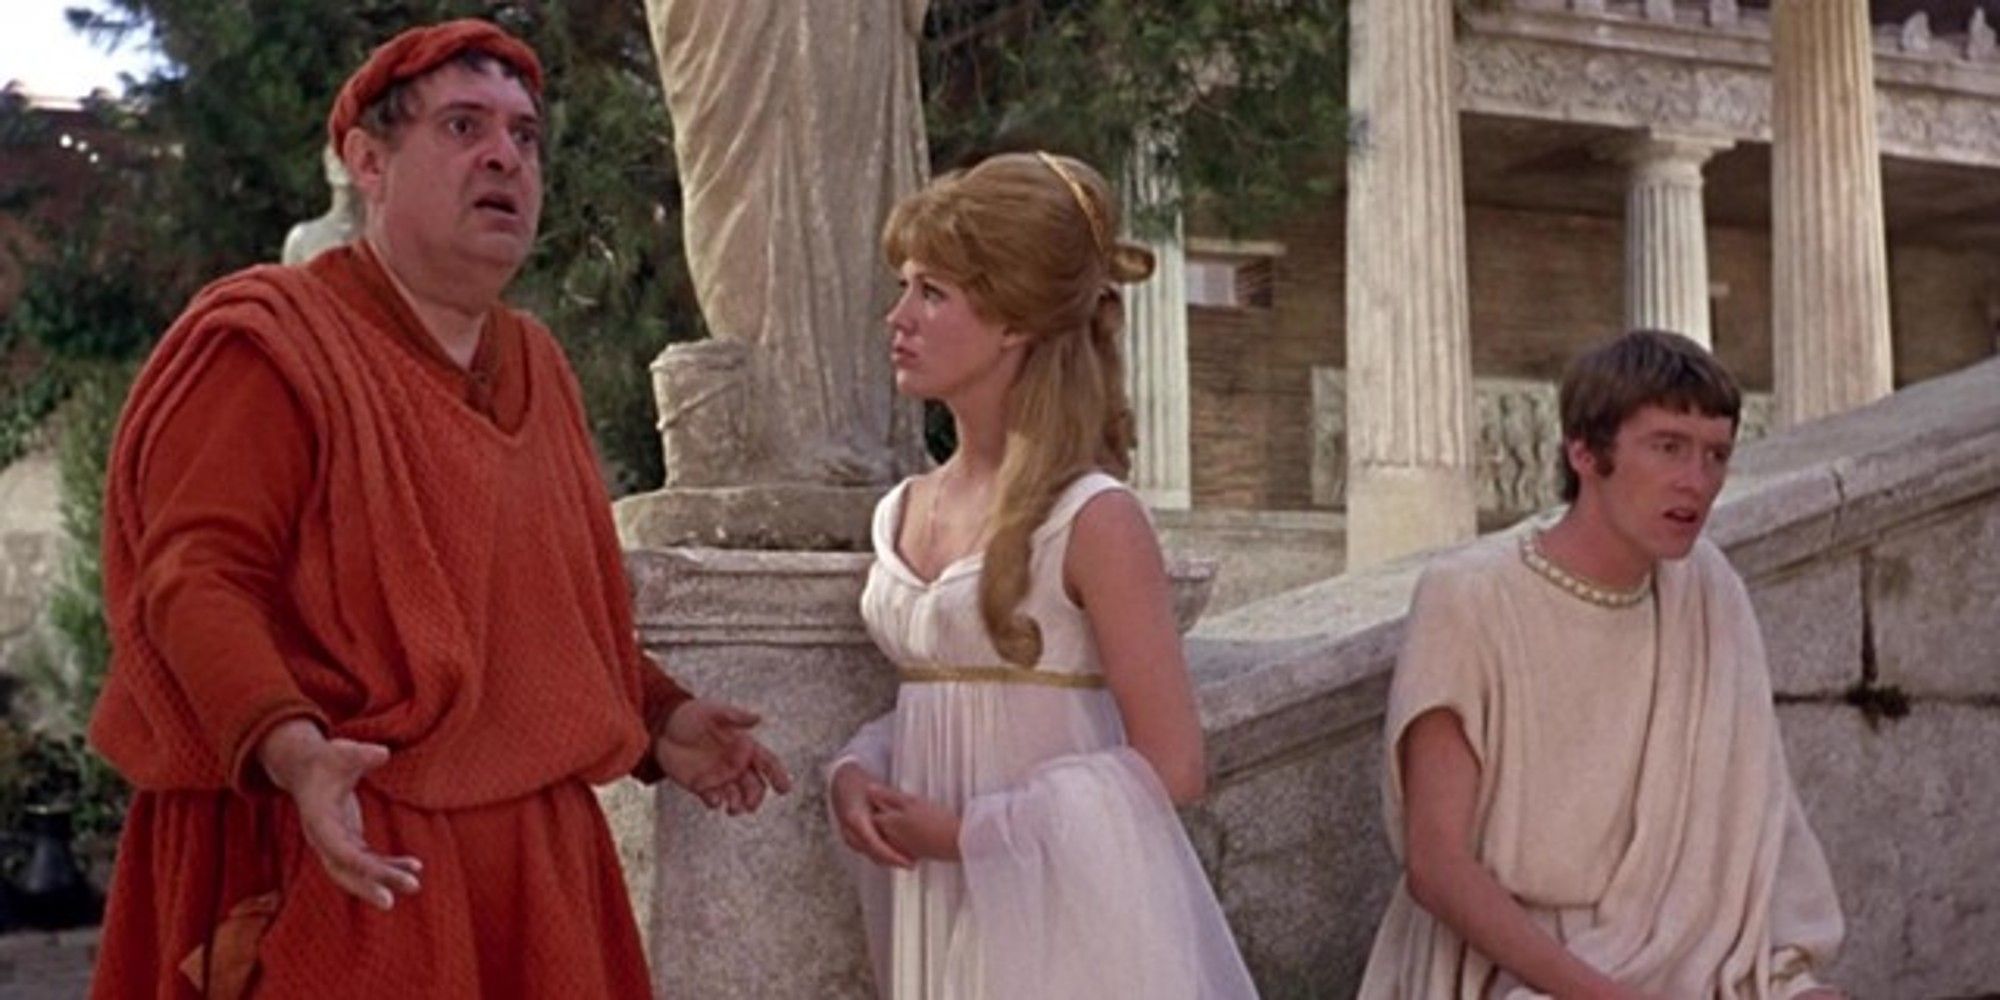 Pseudolus, Hero, and Philia in A Funny Thing Happened on the Way to the Forum